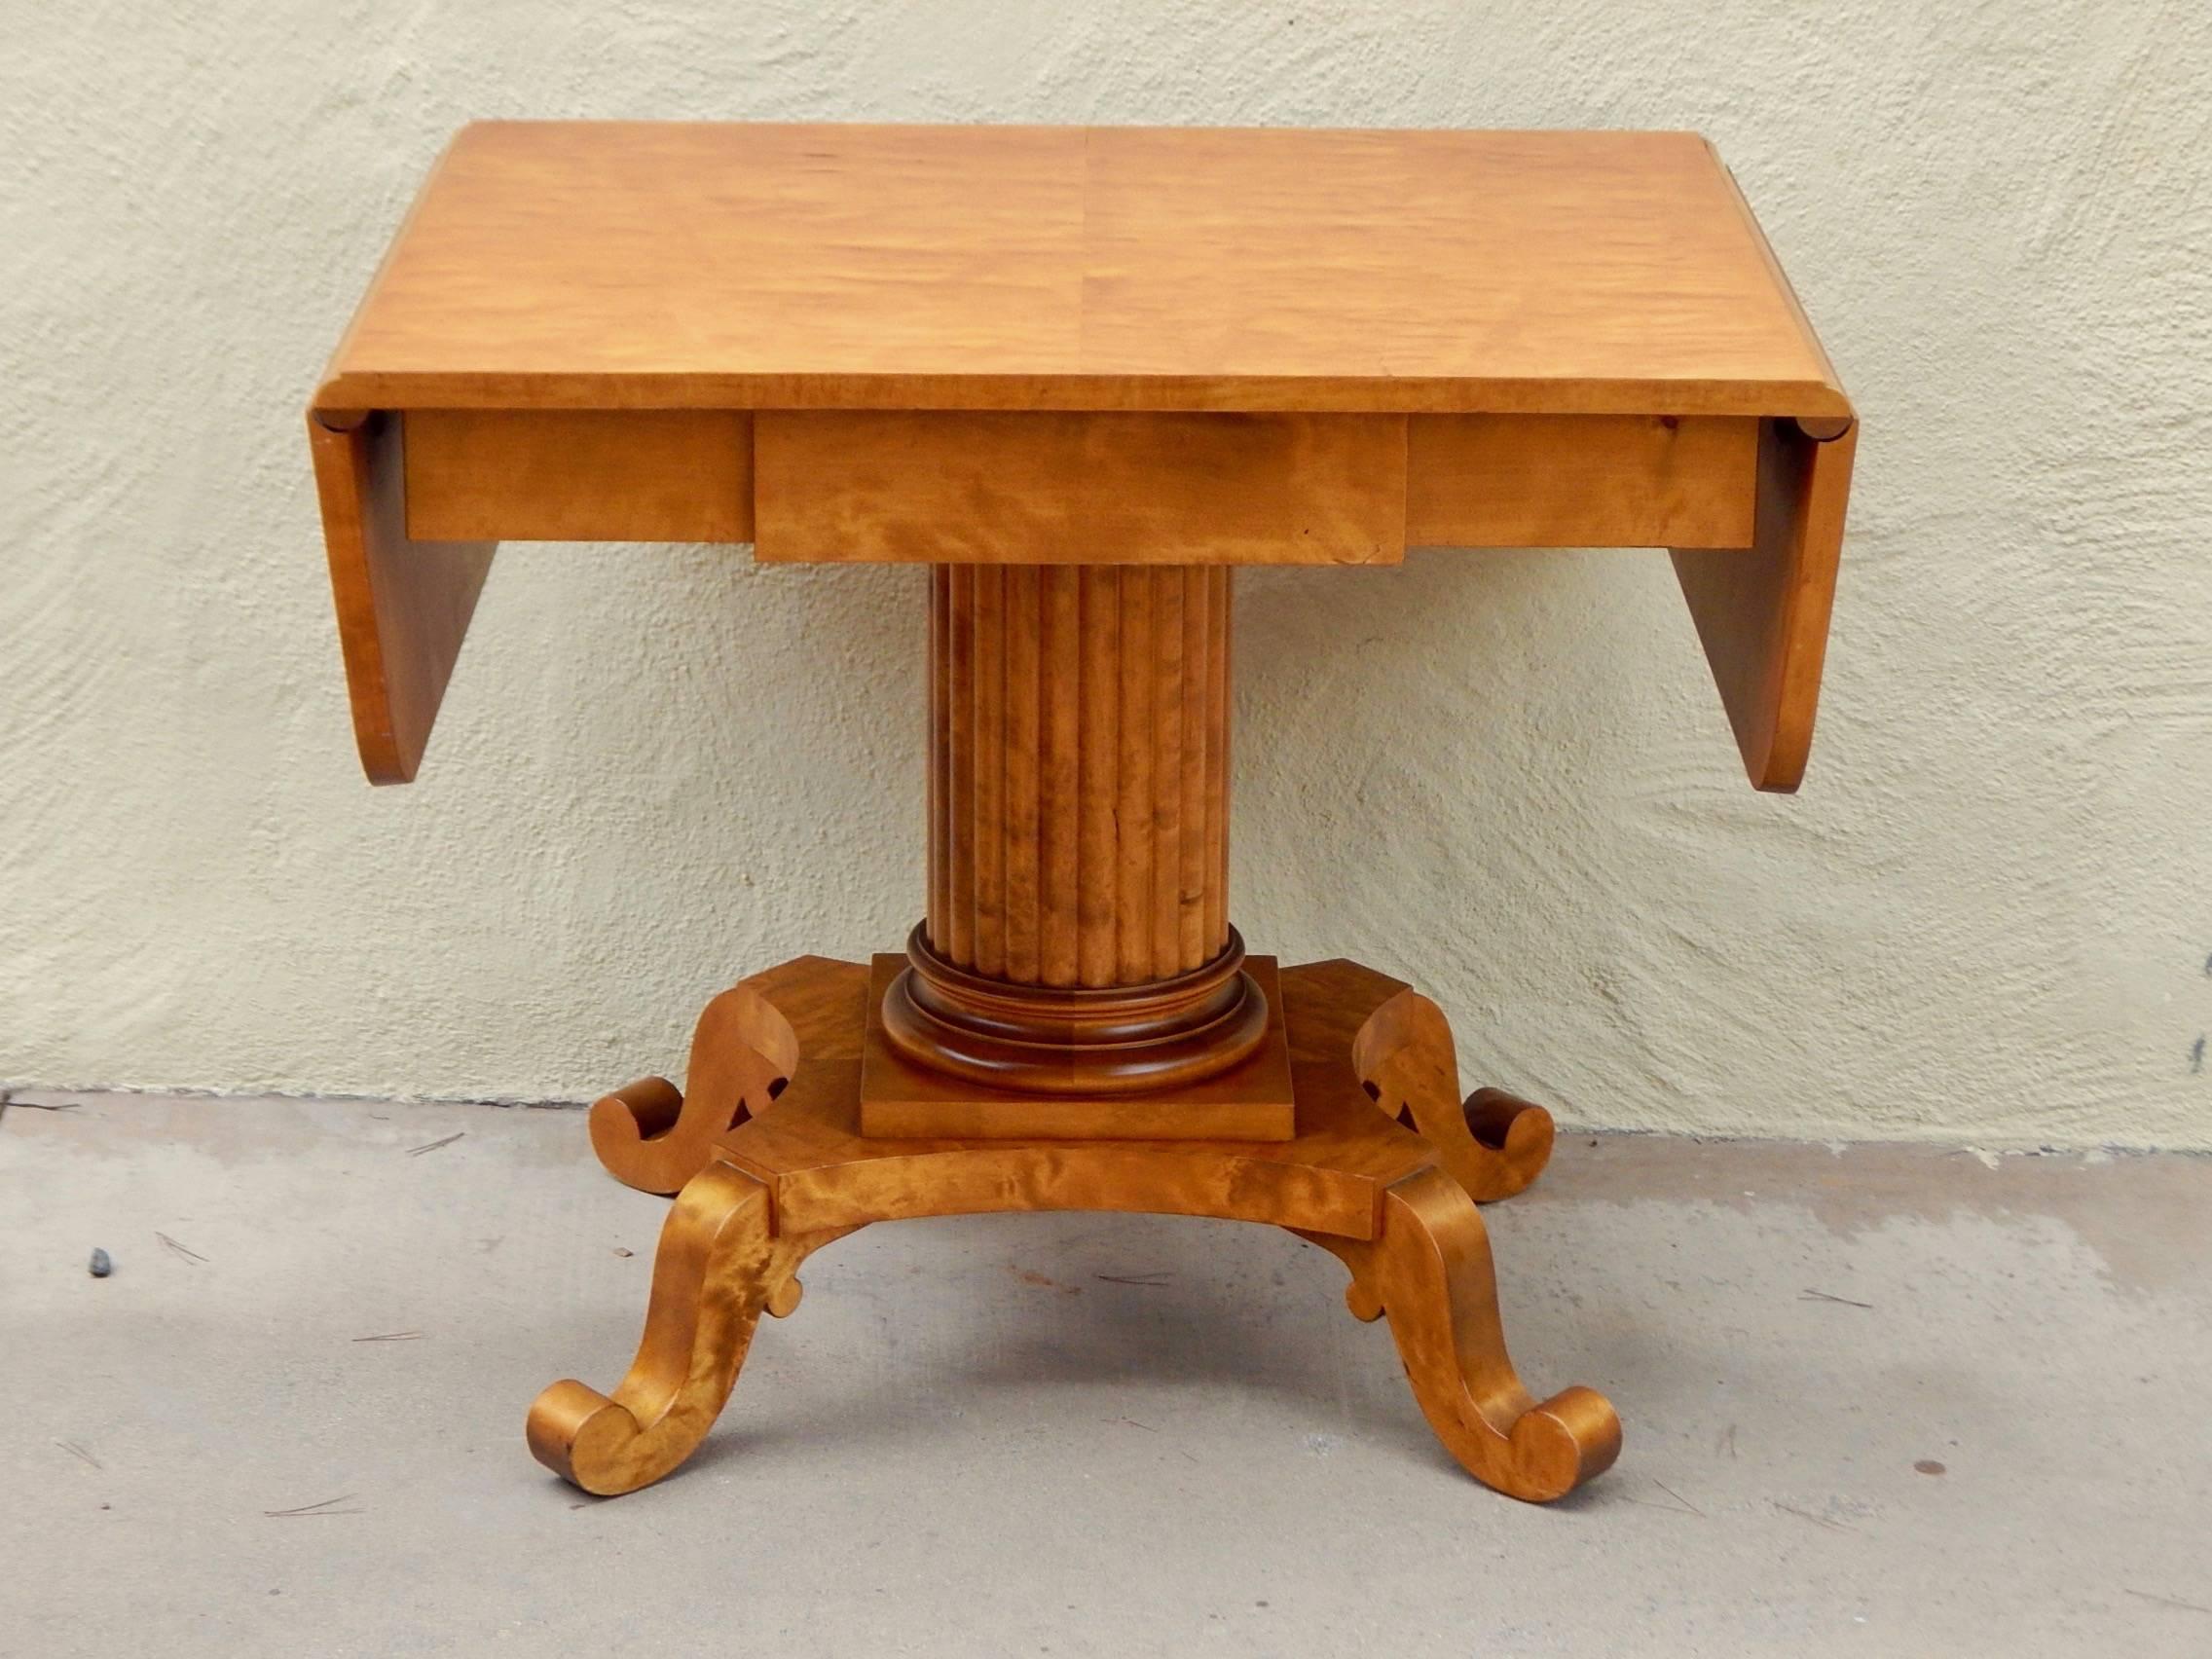 Swedish Biedermeier Revival drop leaf centre/side table rendered in highly figured golden flame birch wood. Stamped Johan Ekman, Malmö, Sweden on underside.
In excellent original condition with some wear and surface scratches. See photos for more